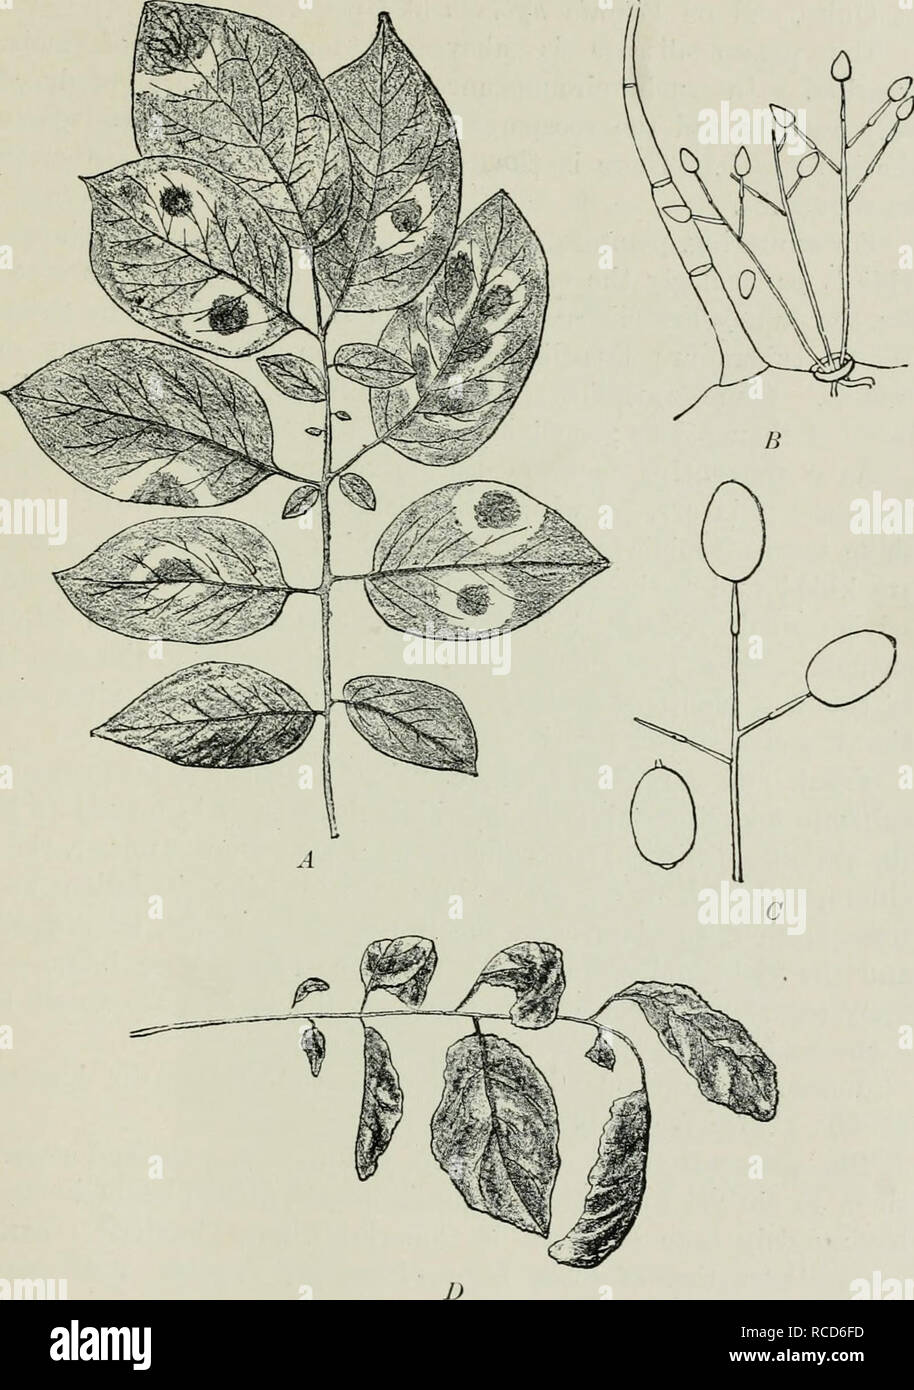 . Diseases of plants induced by cryptogamic parasites; introduction to the study of pathogenic Fungi, slime-Fungi, bacteria, &amp; Algae. Plant diseases; Parasitic plants; Fungi. PHYTOPHTHORA. 121. Fig. 3-l.—Phi/to/&gt;hth.nra infeslaas. The Potato disease. A, Potato leaf with brown spots and white patches of fungi on the lower iide. B, Groups of conidio- j.hores emerging from a stoma close beside a hair of the potato leaf. C, Conidio- I'hores and conidia, much enlarged. Z», Leaf of potato much shrivelled up and brown, as in the later stages of the disease, fv. Tubeuf del.). Please note that t Stock Photo